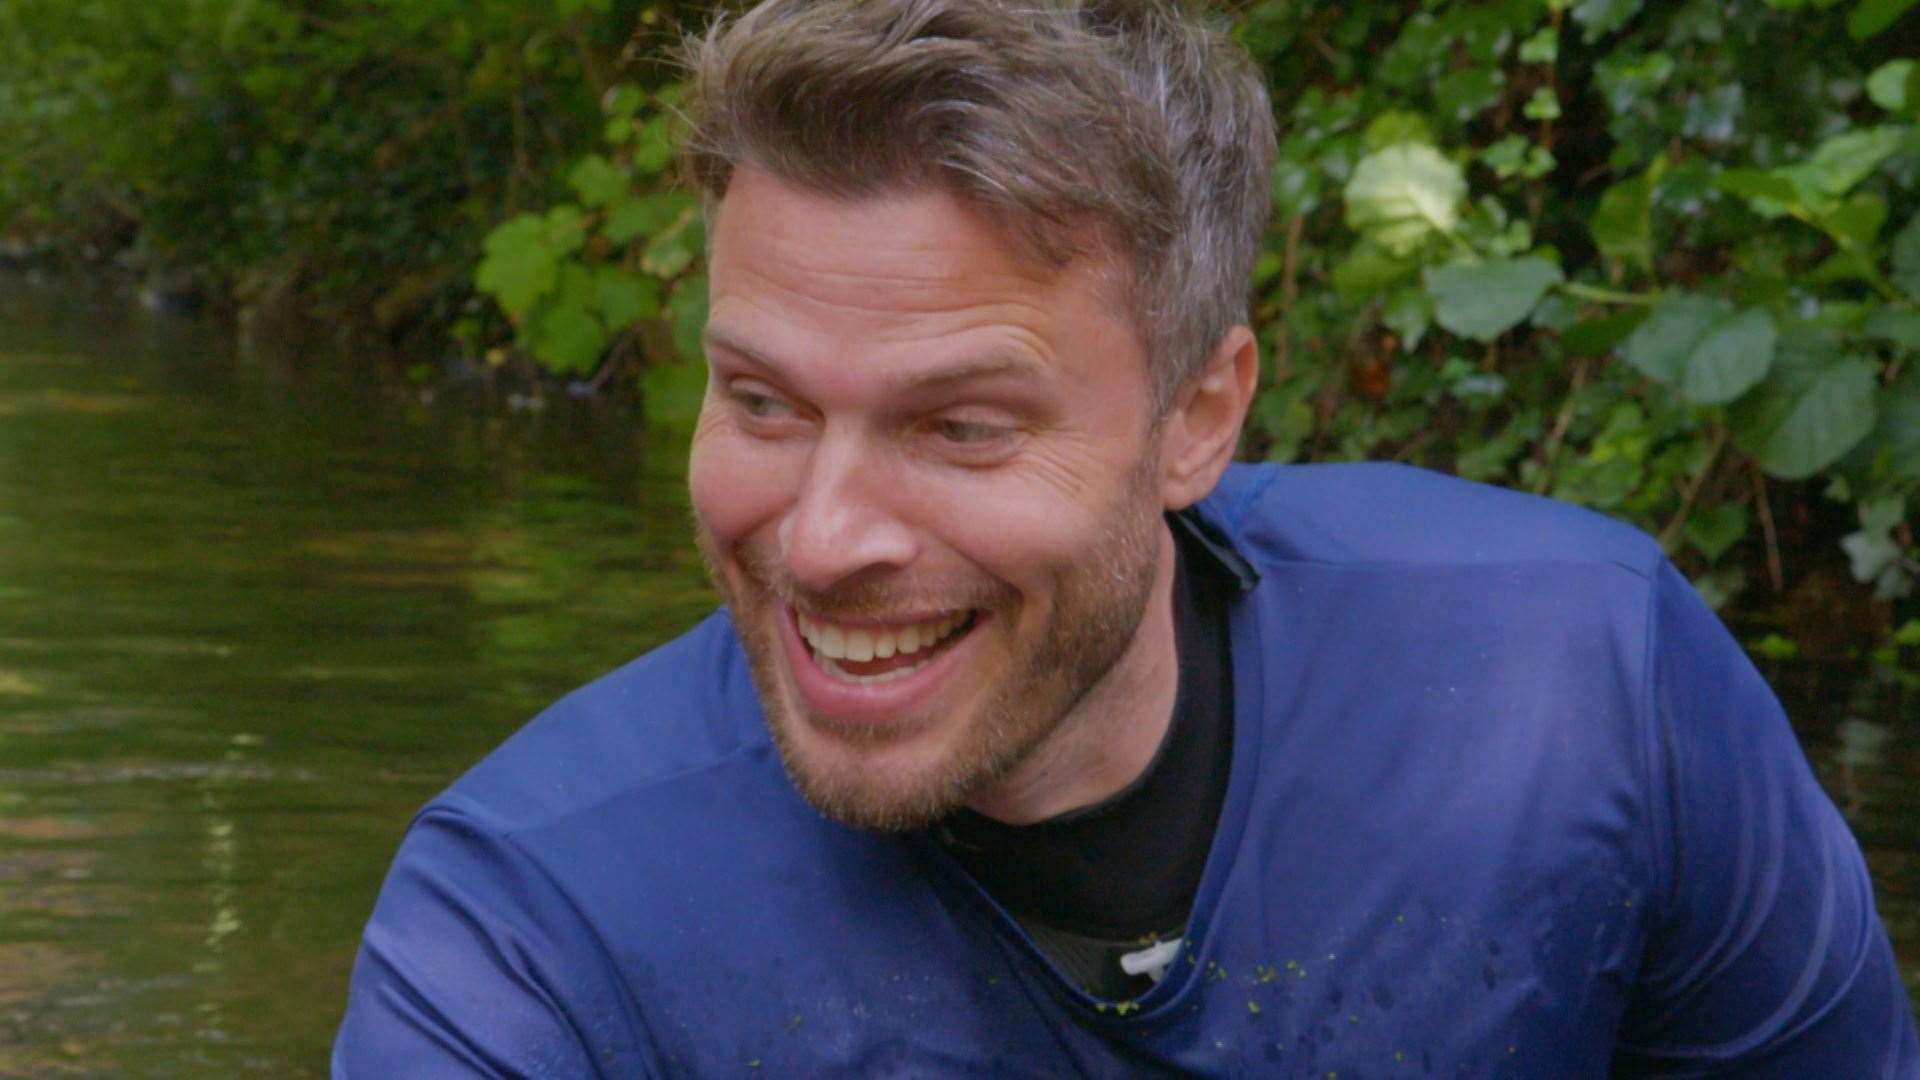 Rick Edwards, lead presenter of the show